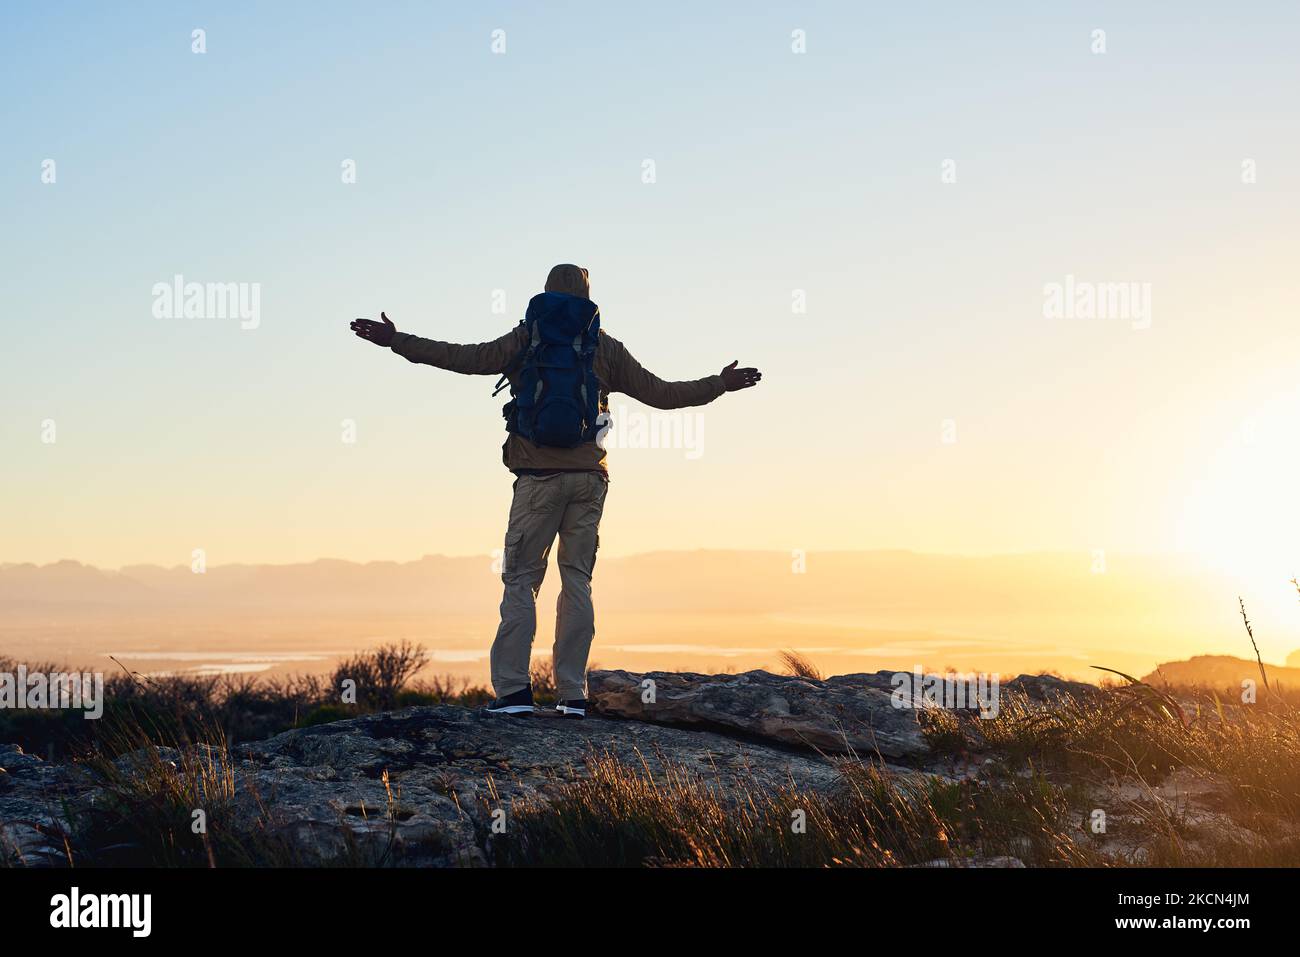 The world is your oyster. a hiker with his arms raised standing on top of a mountain. Stock Photo